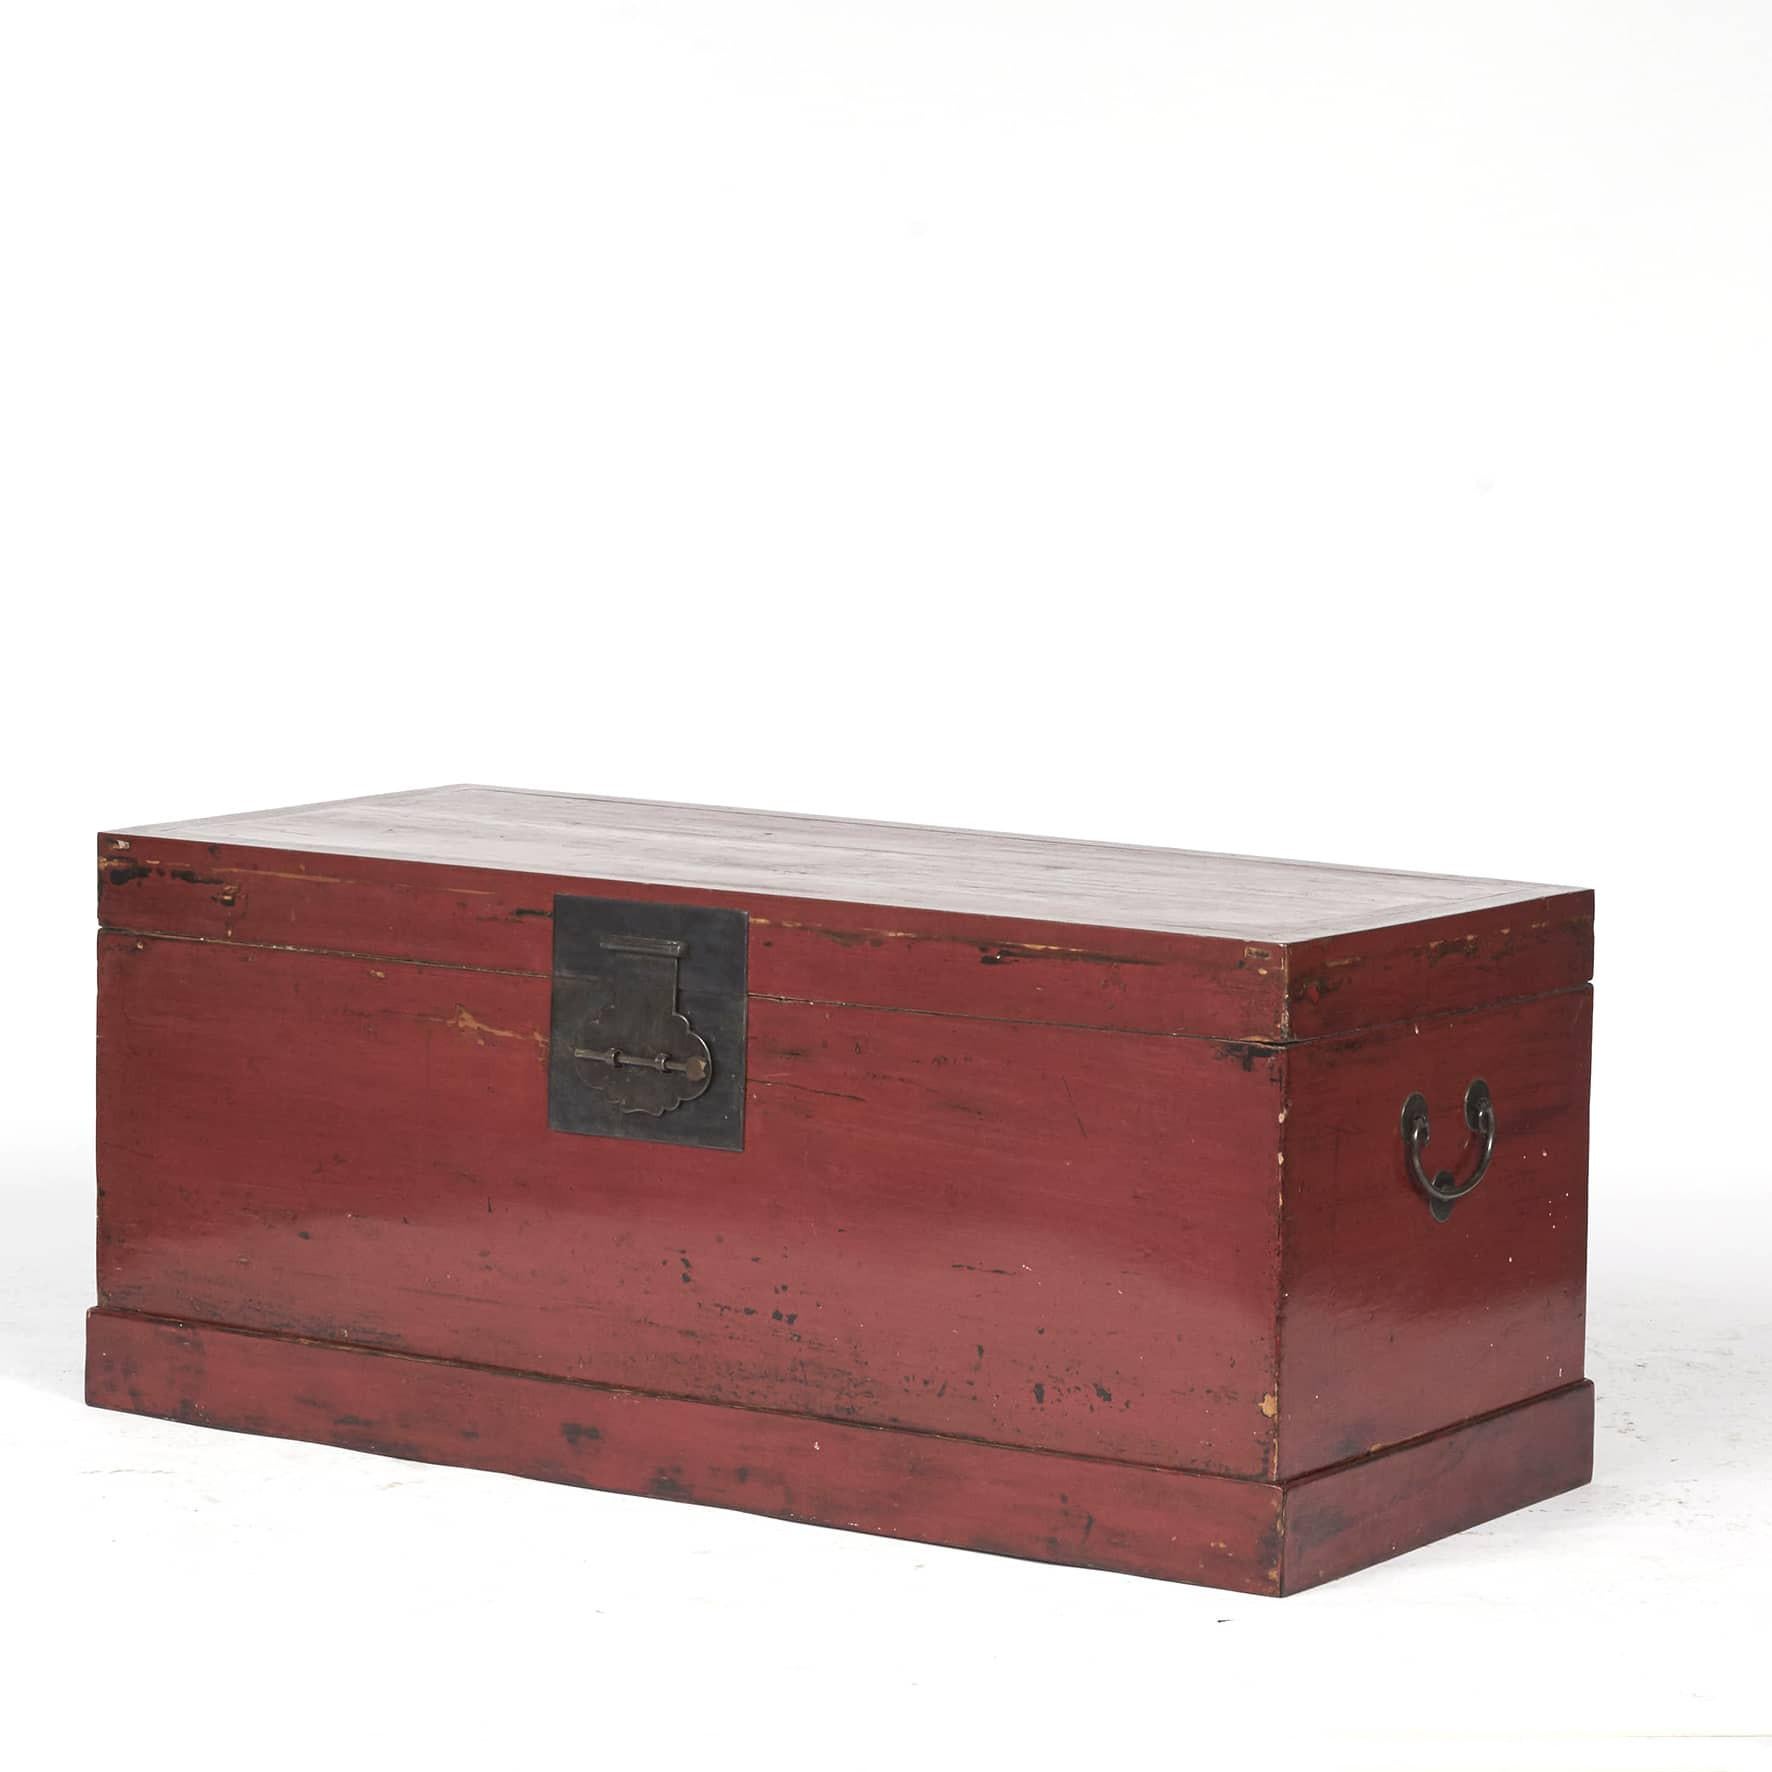 Qing Chinese Chest with Original Red Lacquer, Jiangsu, 1850-1870